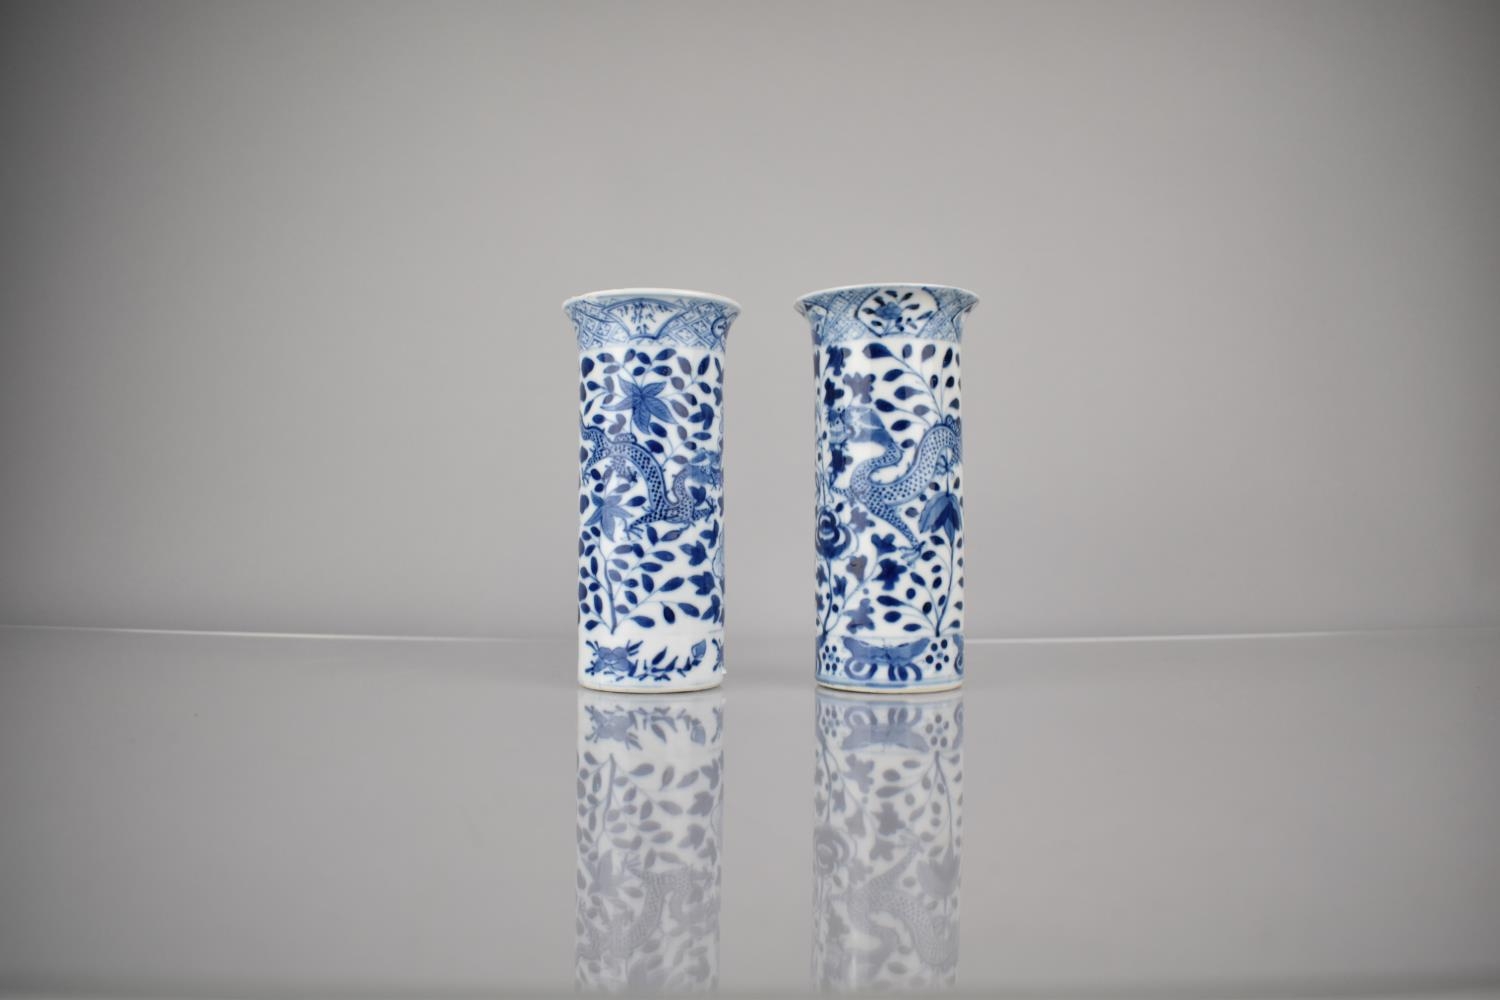 A Near Pair of 19th/20th Century Chinese Porcelain Sleeve Vases Decorated with Dragons Amongst - Image 2 of 5